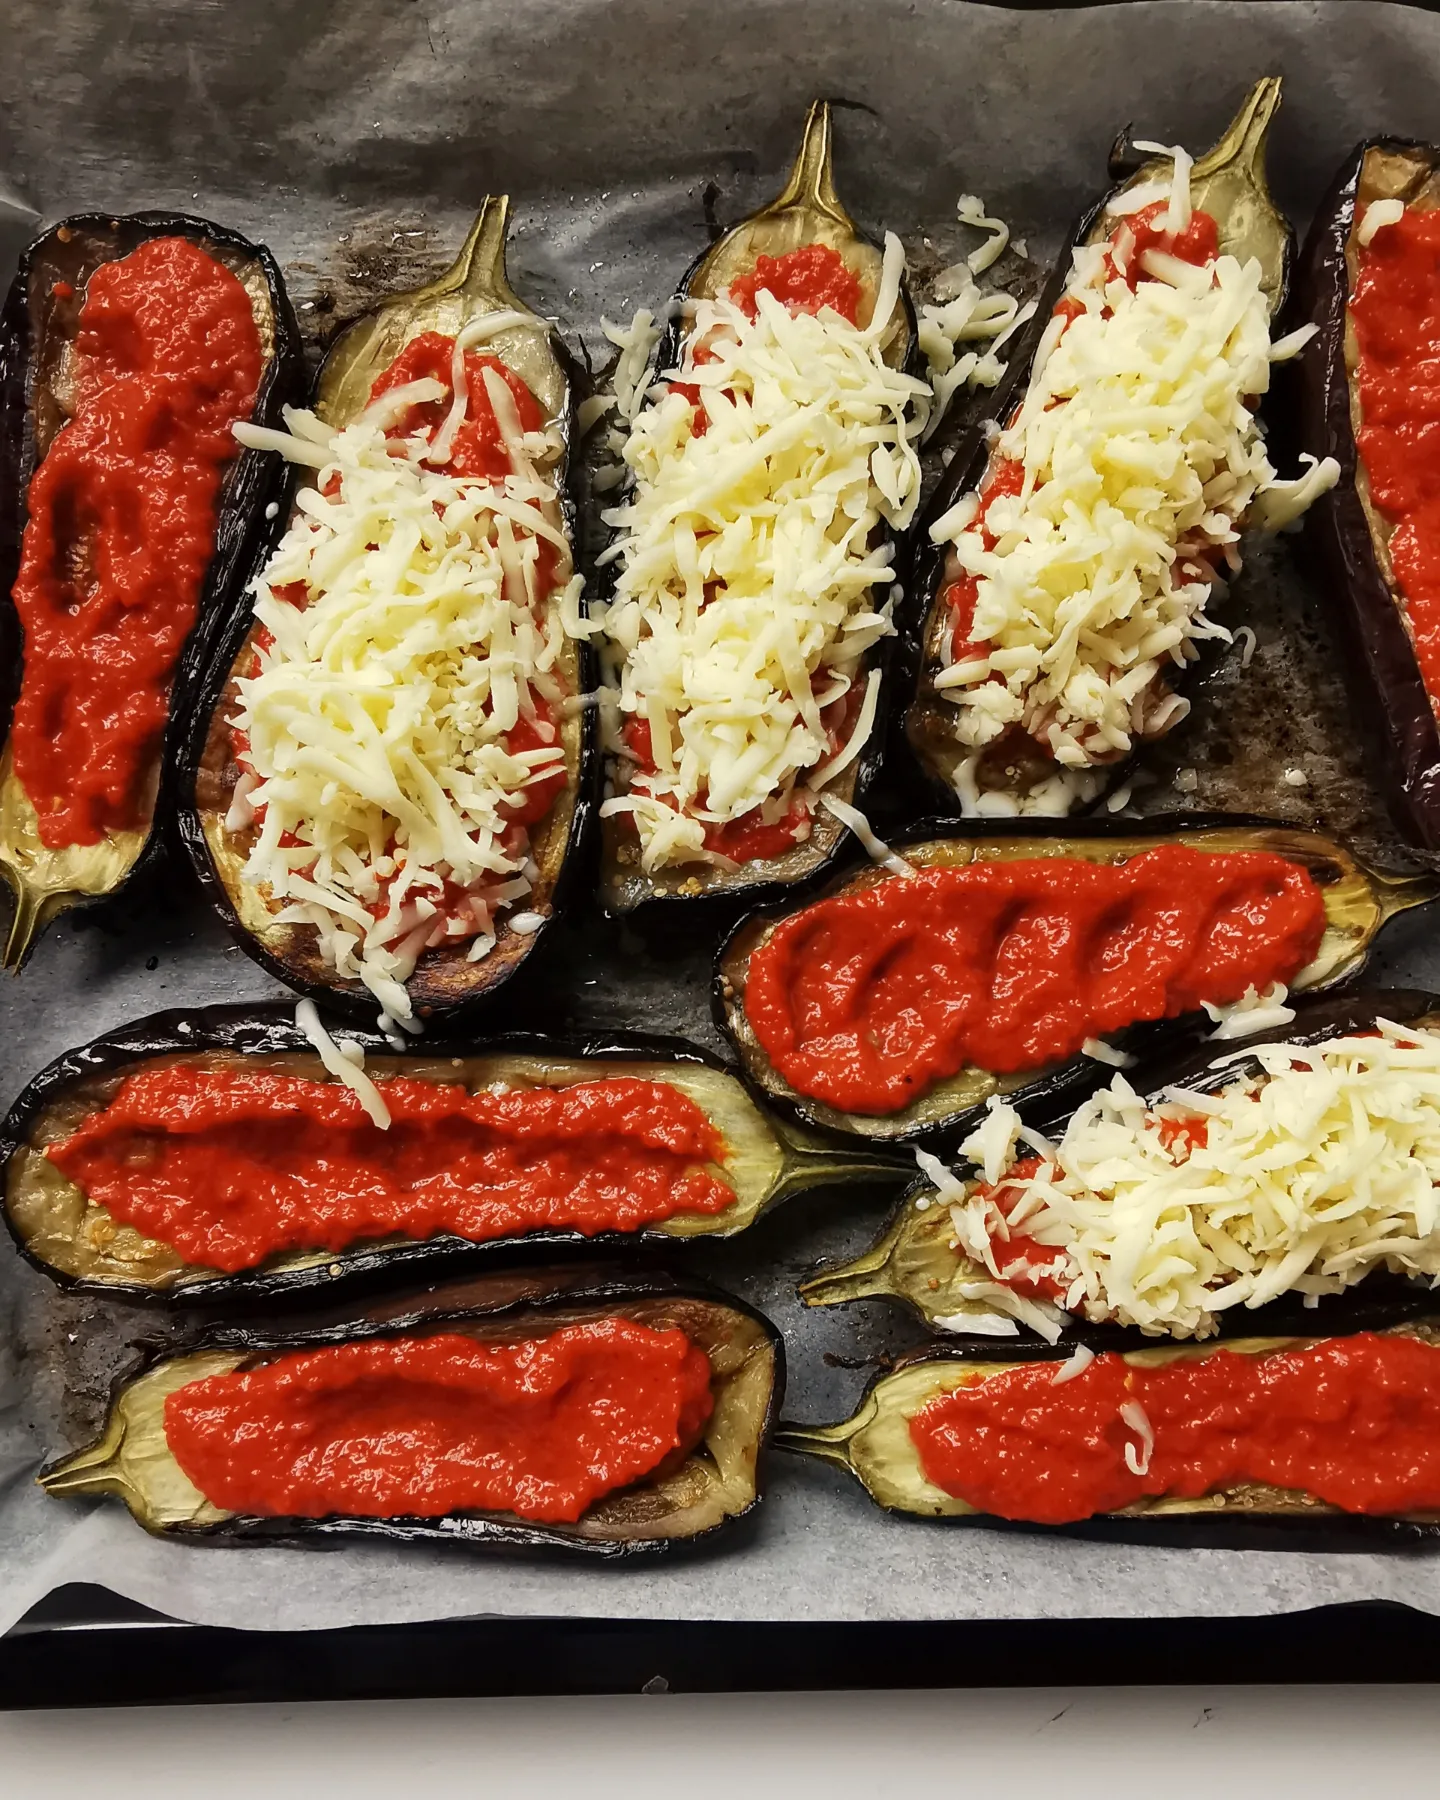 Roasted cheesy eggplants with red pepper sauce